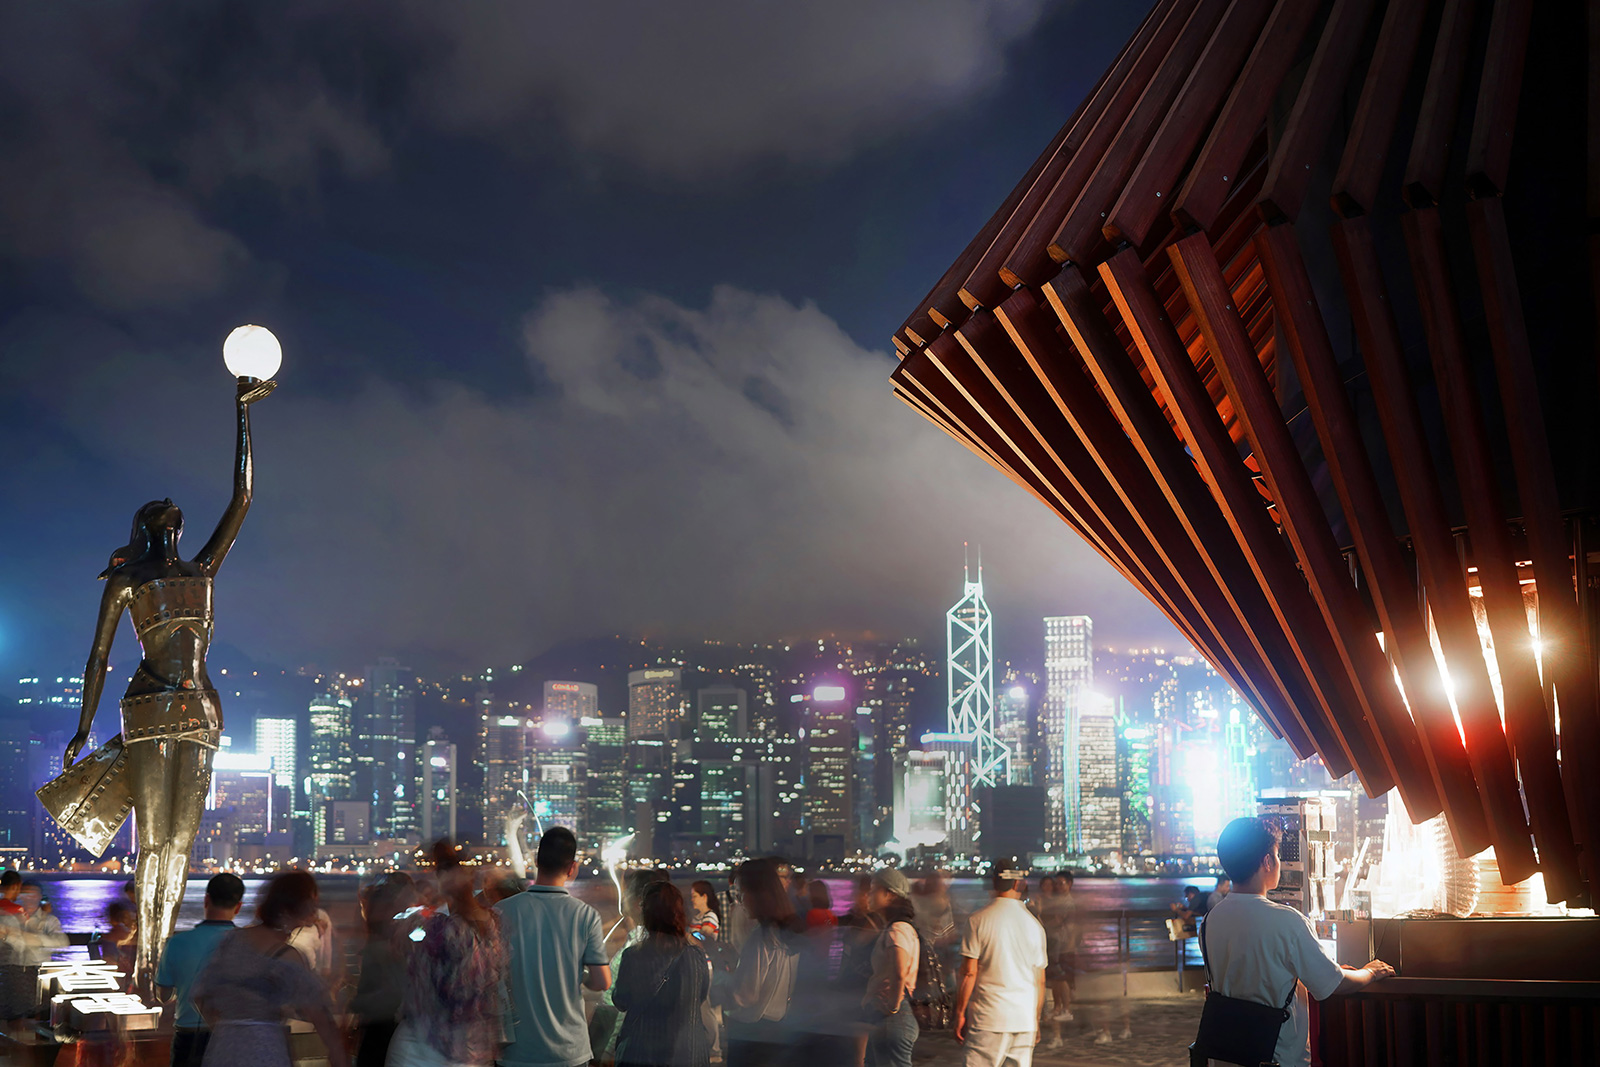 Kinetic architecture arrives in Hong Kong with the Harbour Kiosk. It's operated by 49 robotic arms